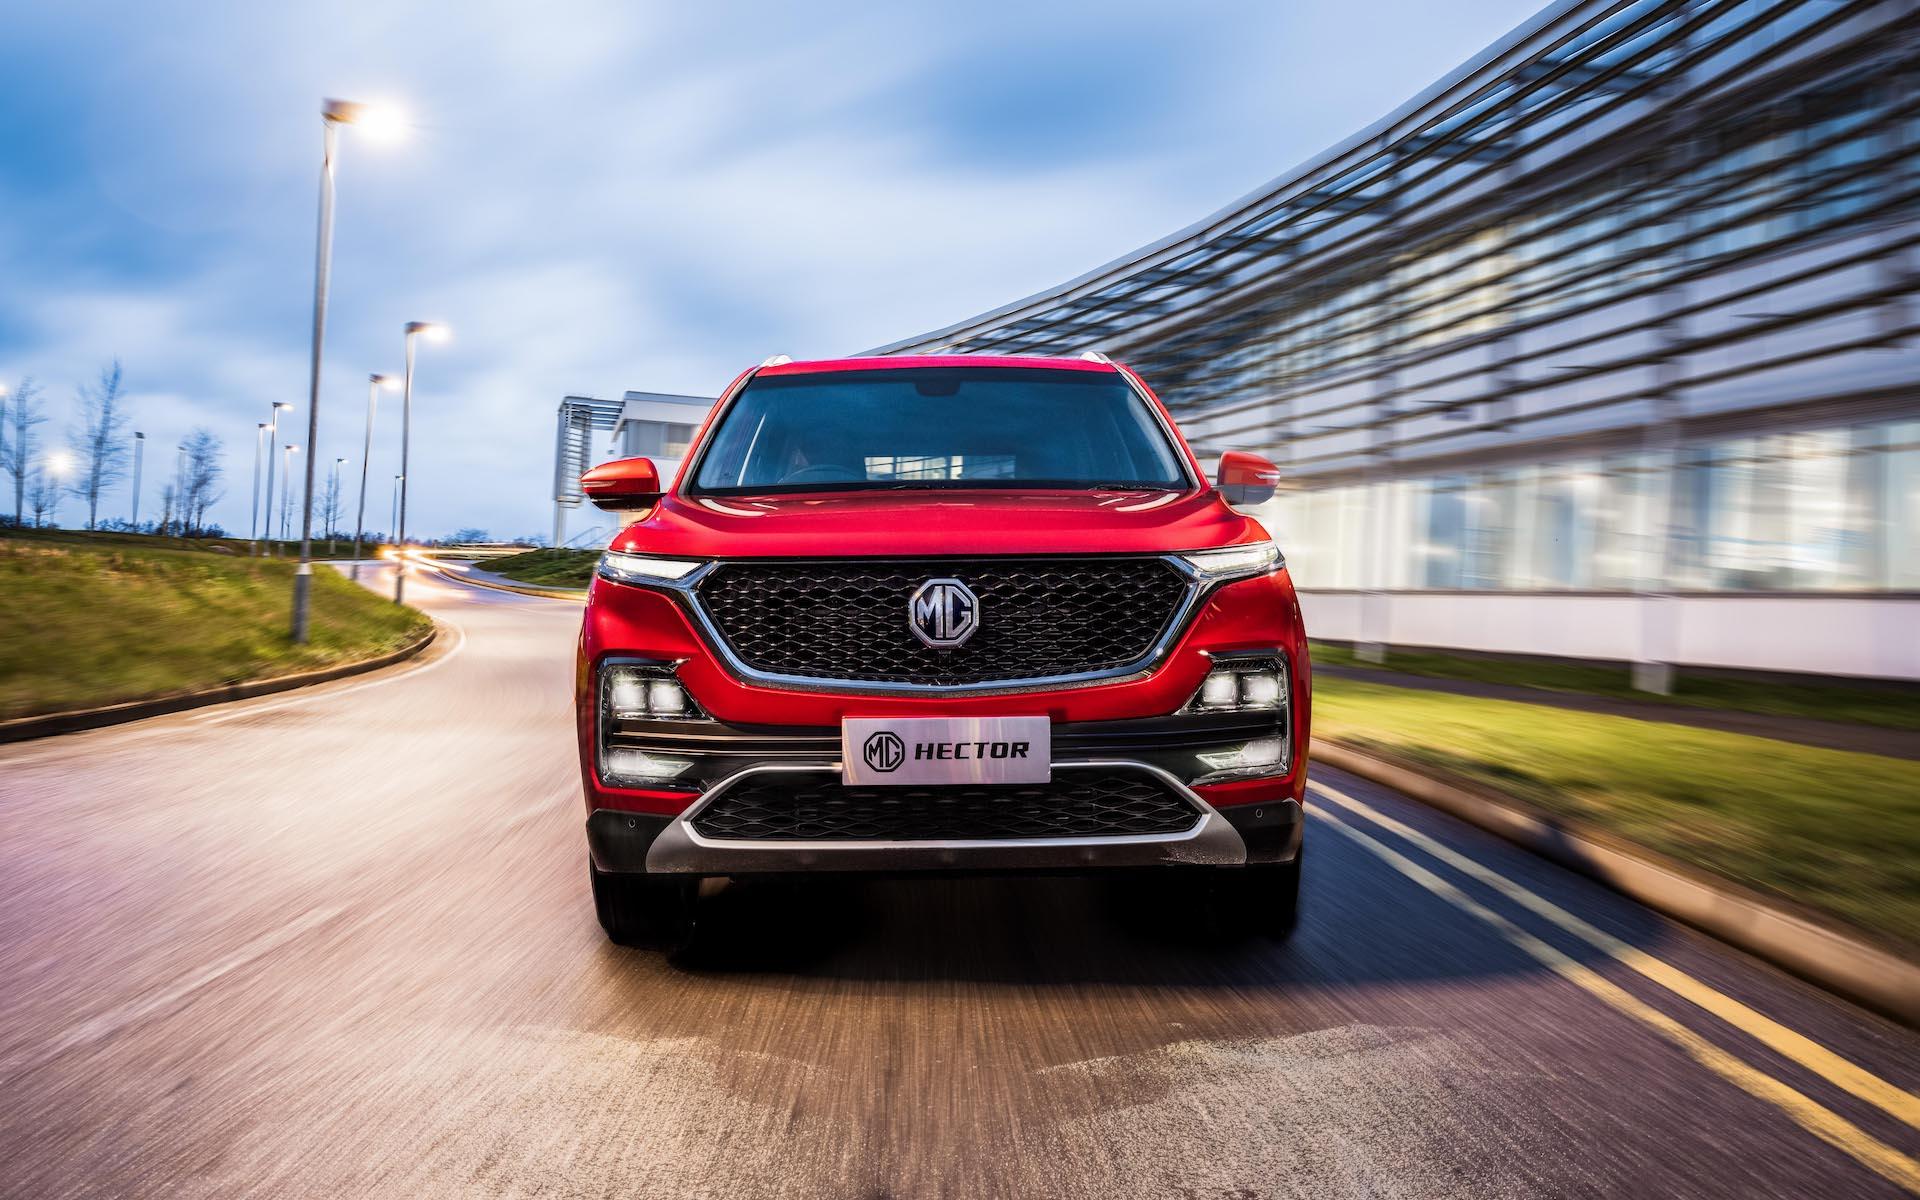 MG Hector to be officially unveiled on 15 May